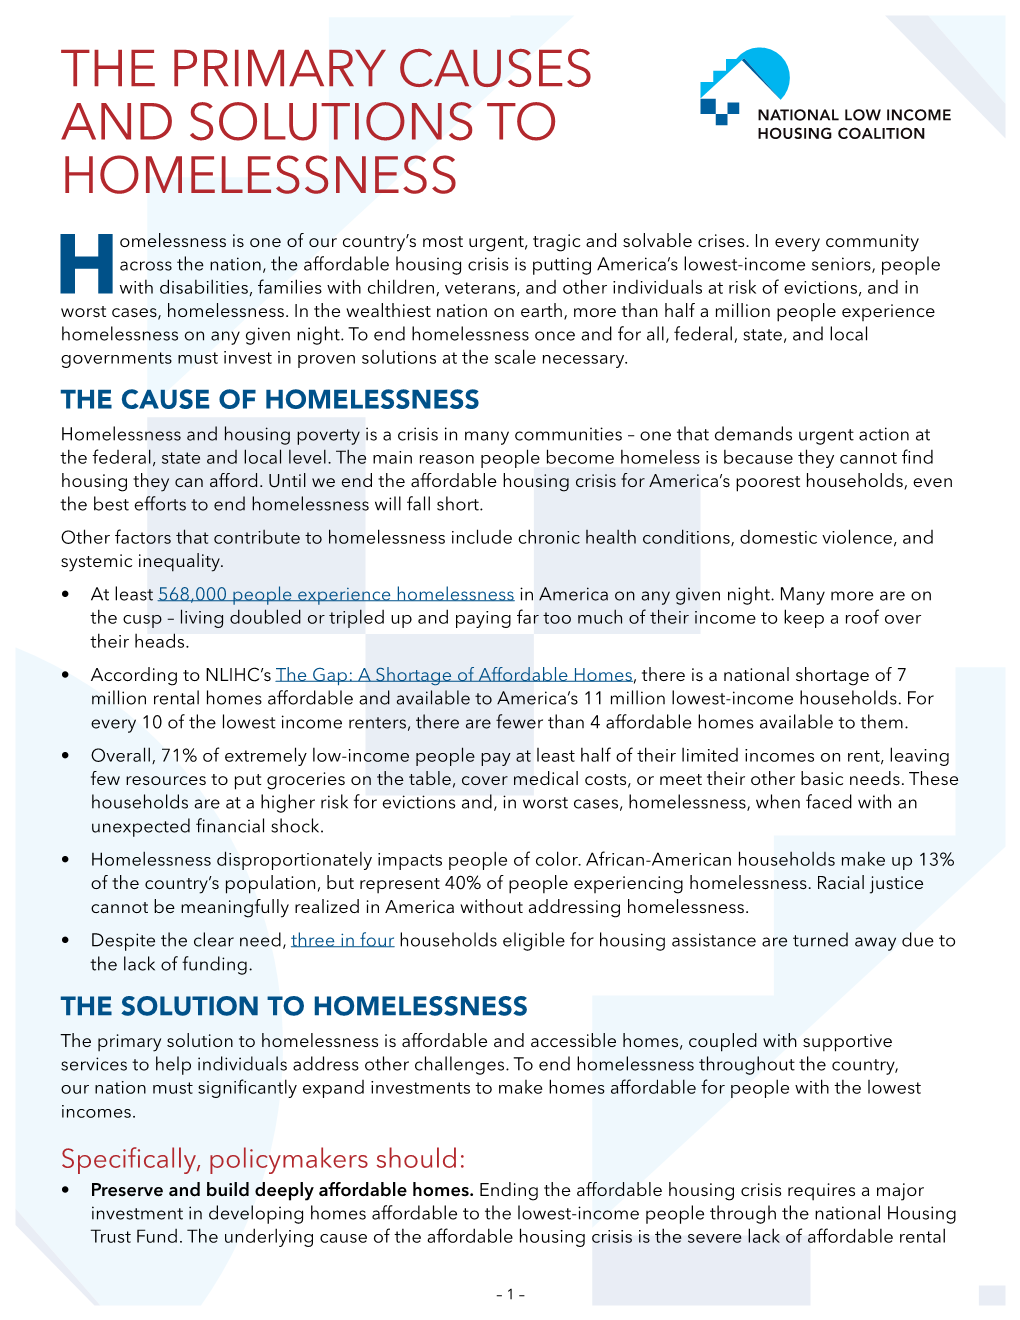 The Primary Causes and Solutions to Homelessness